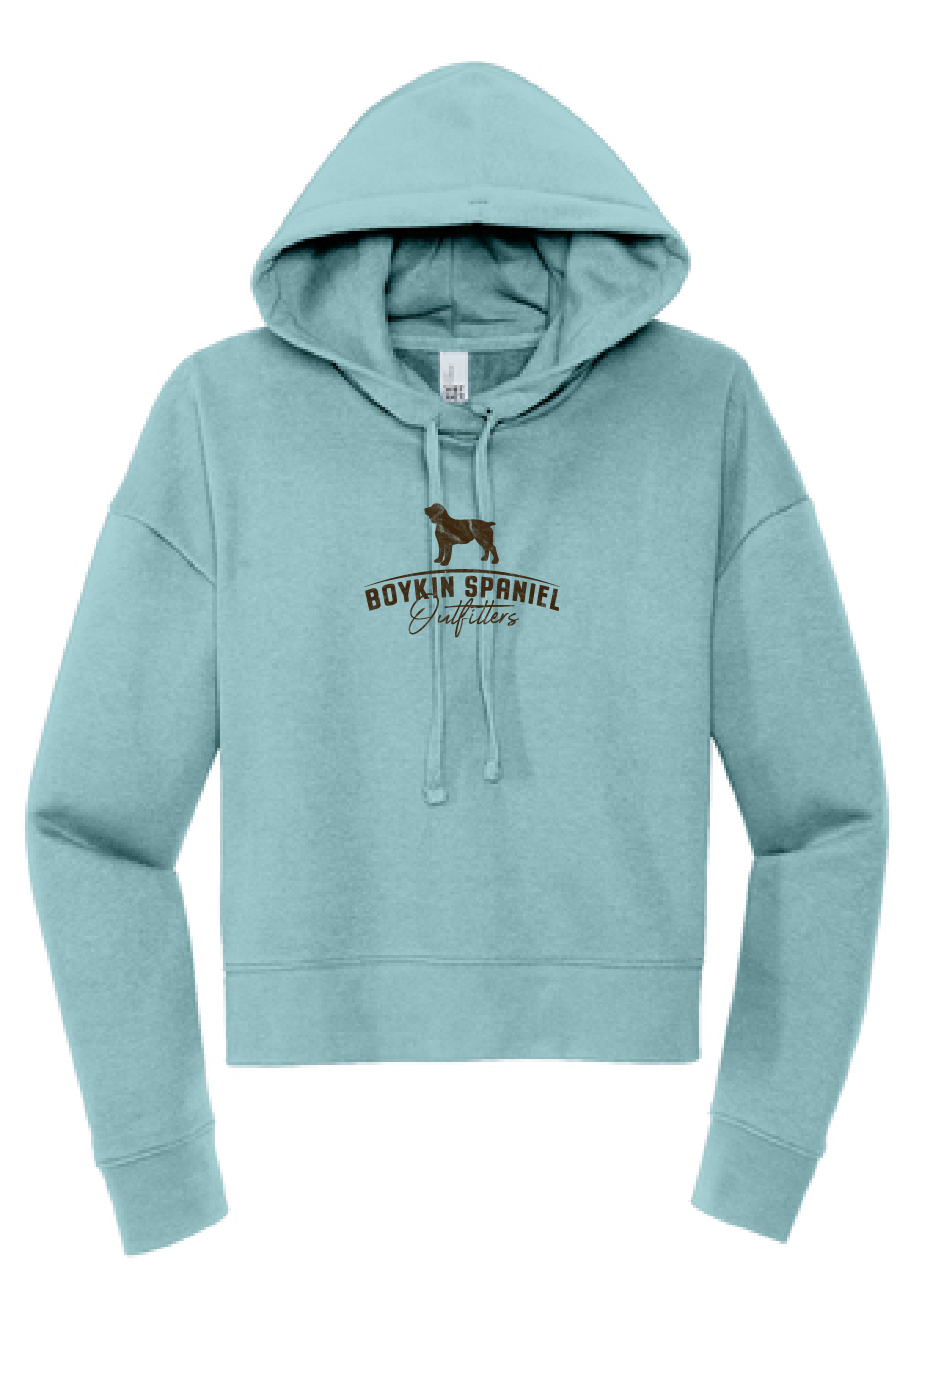 Boykin Spaniel Outfitters Soft Cropped Hoodie